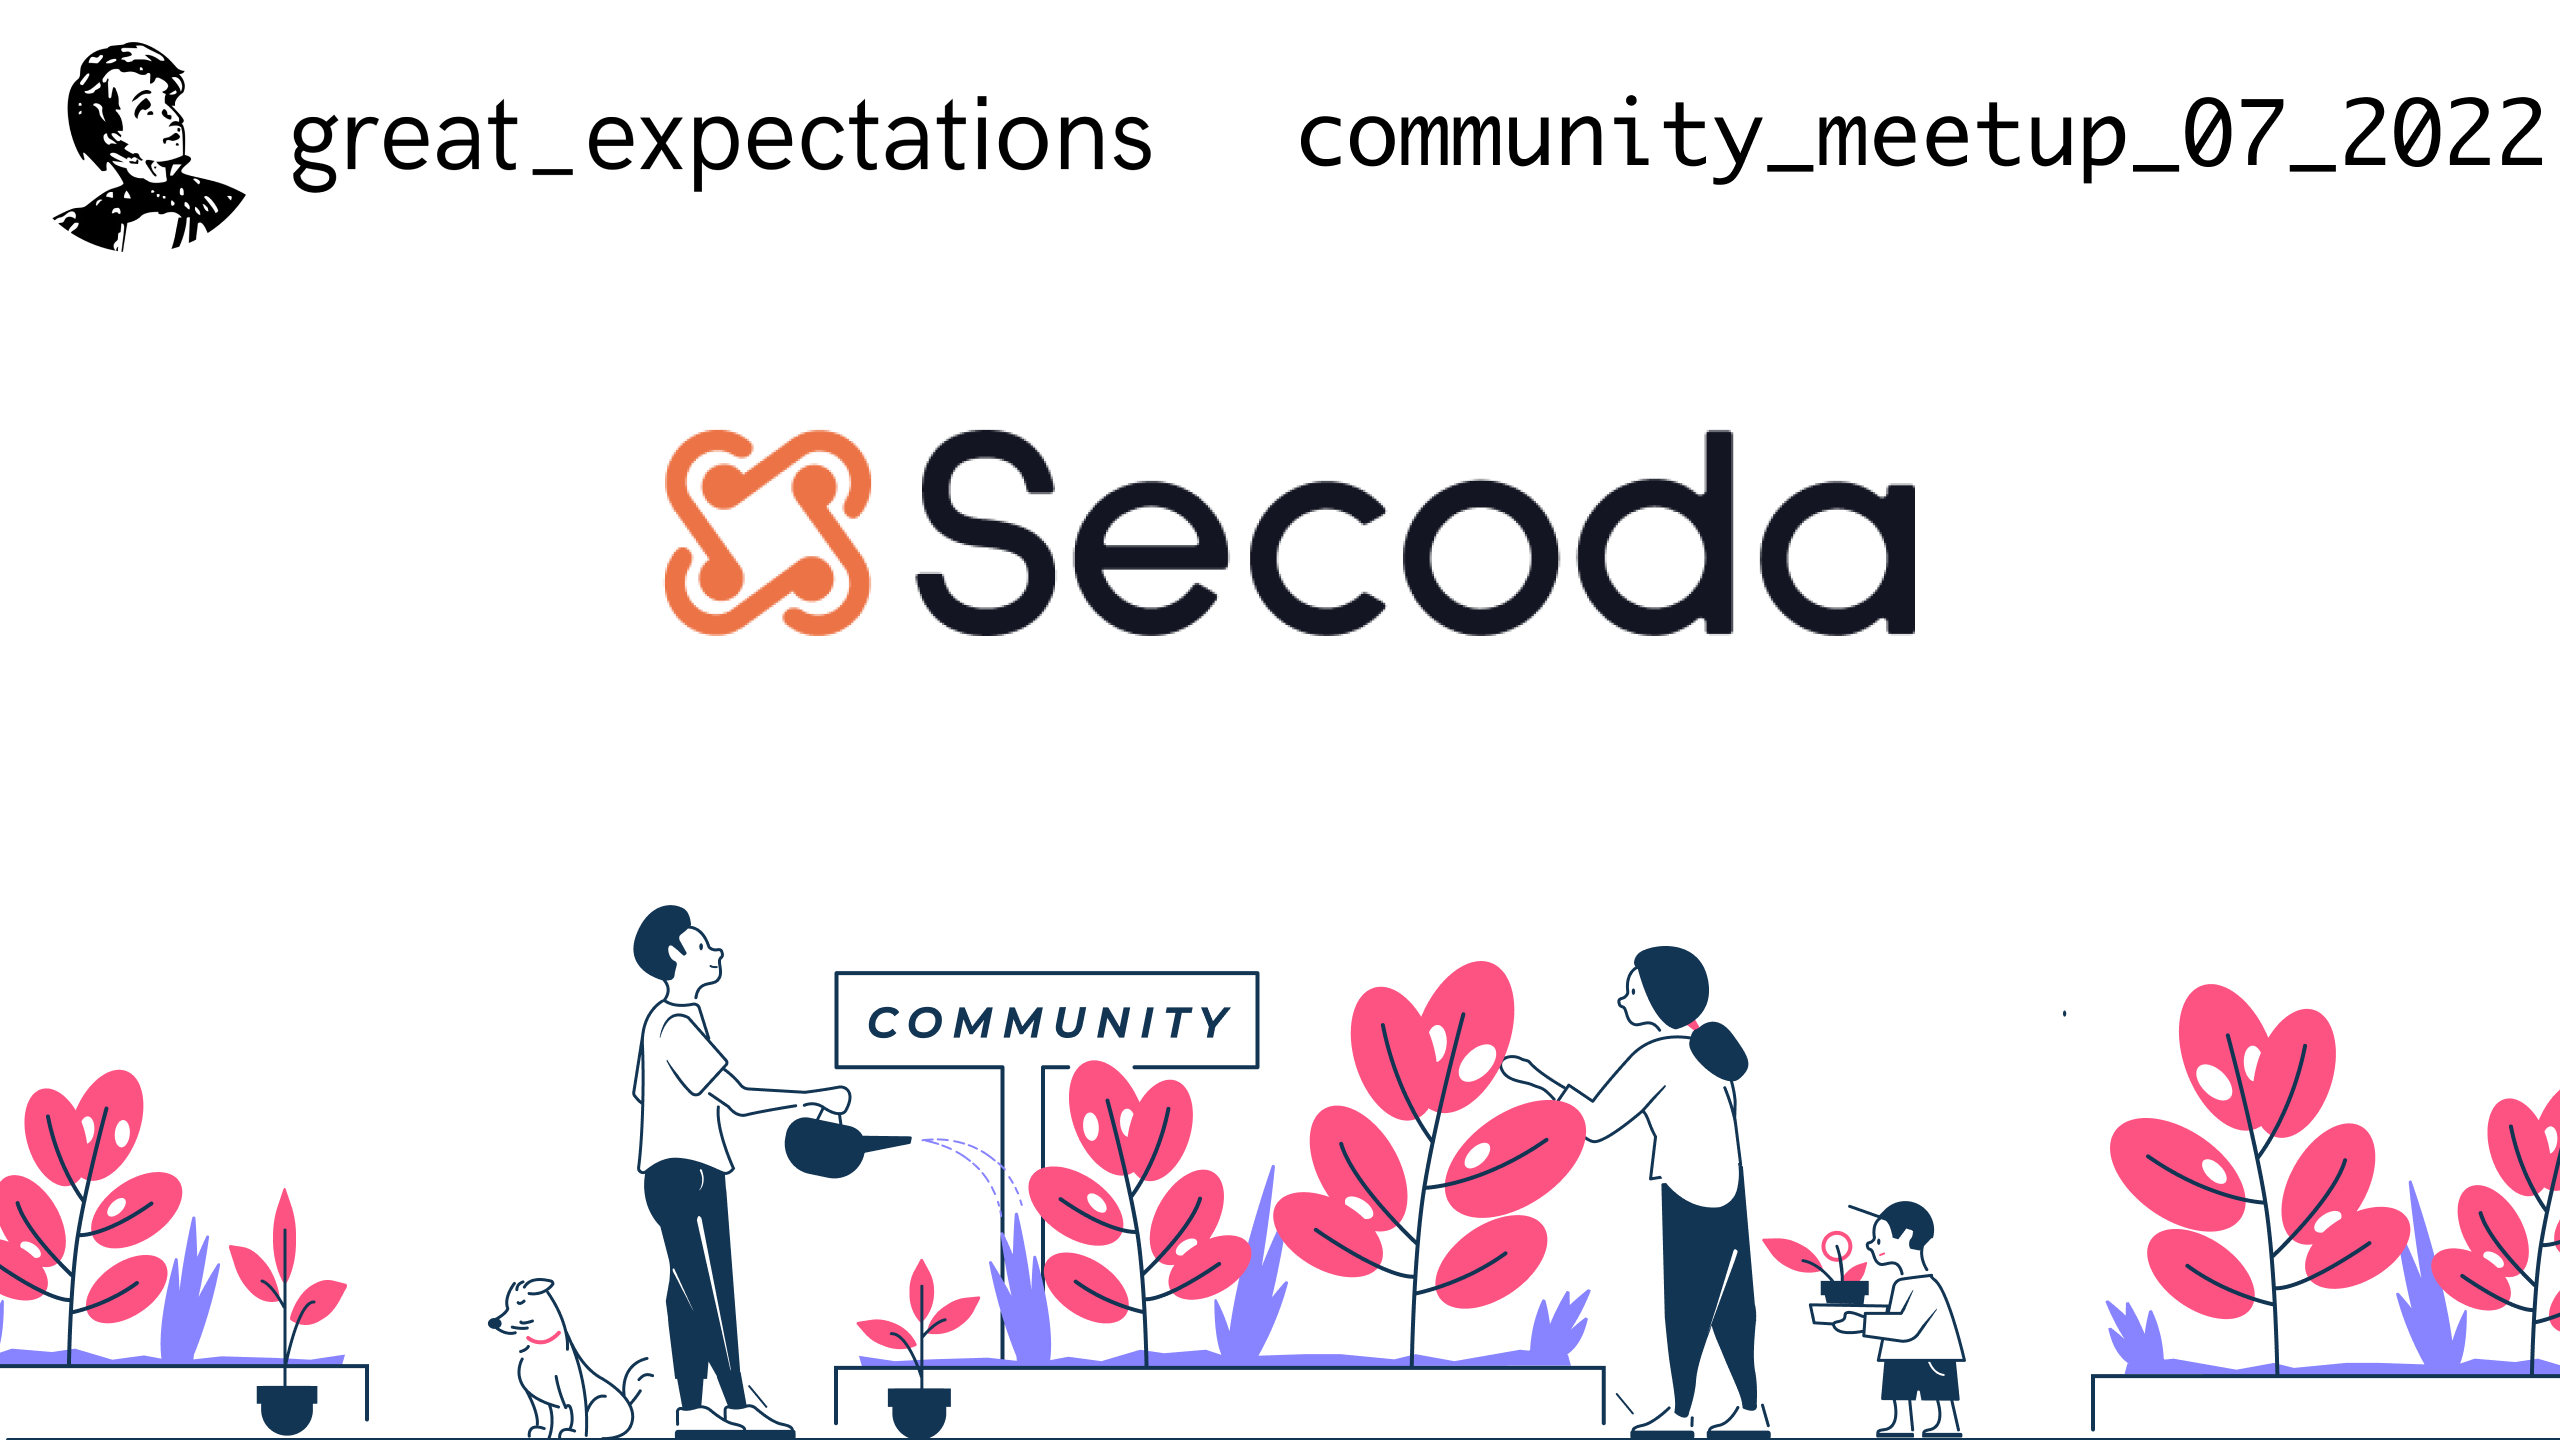 Great Exceptions July 2022 Community Round up cover image with Secoda